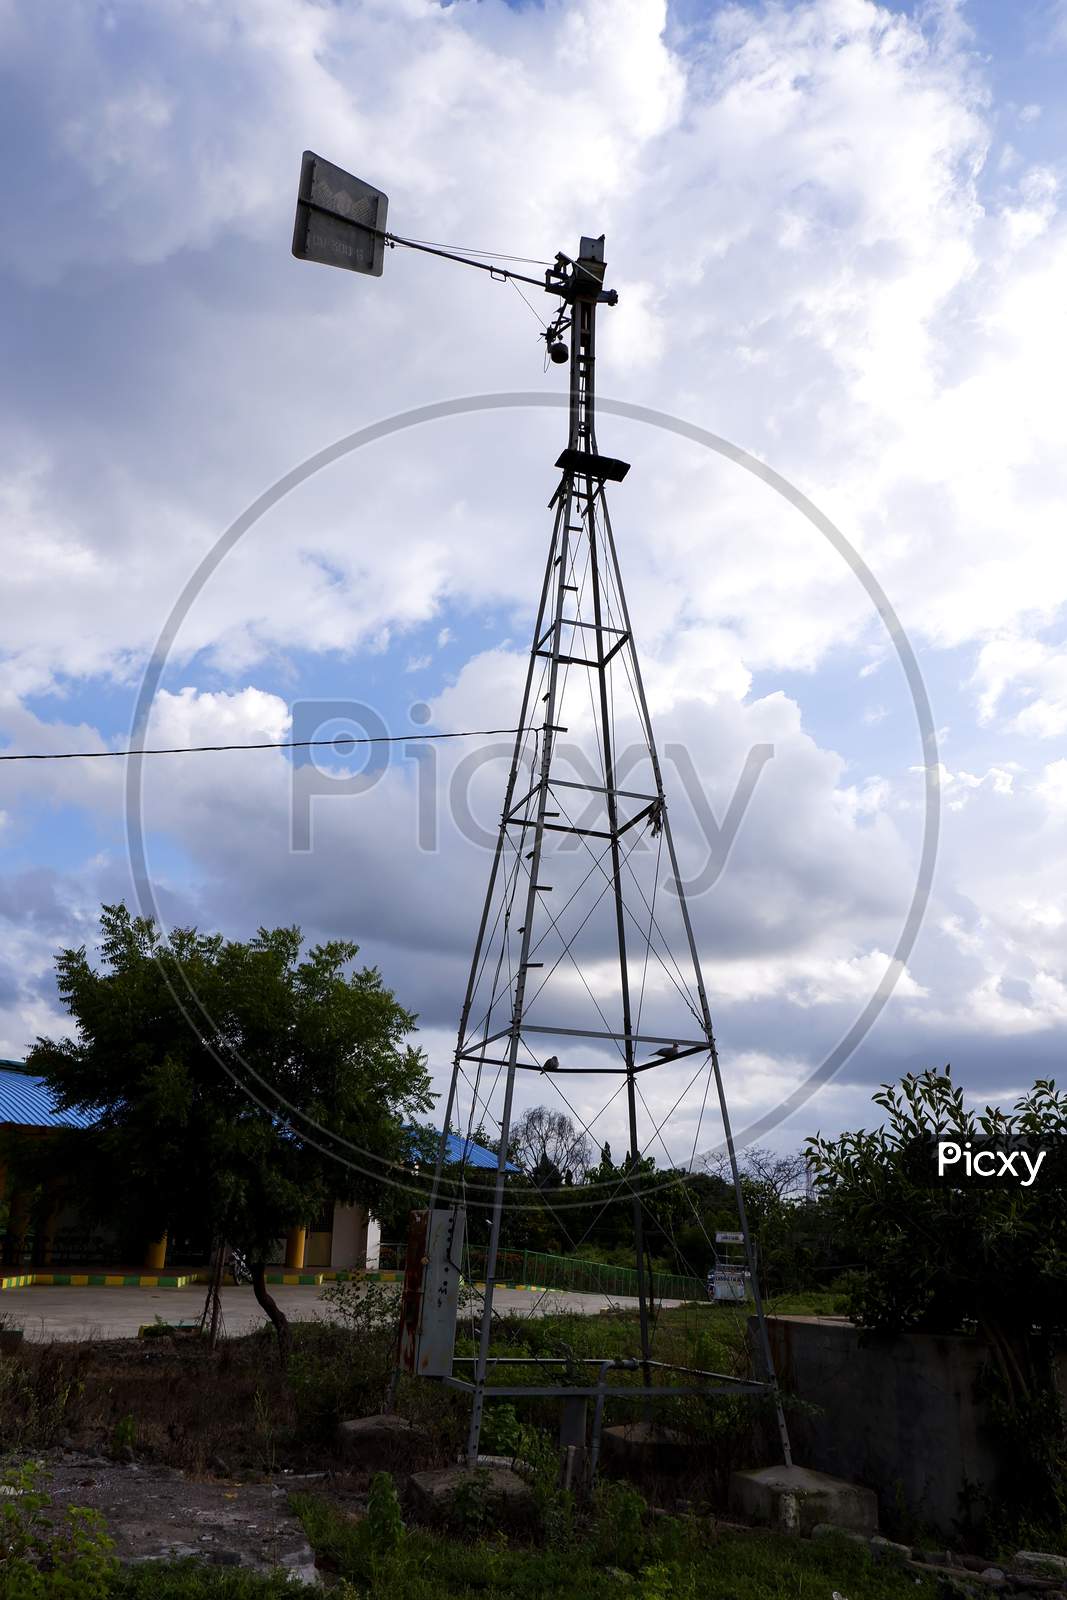 Long View Of Weather Vane Metal Tower Isolated In Outdoor